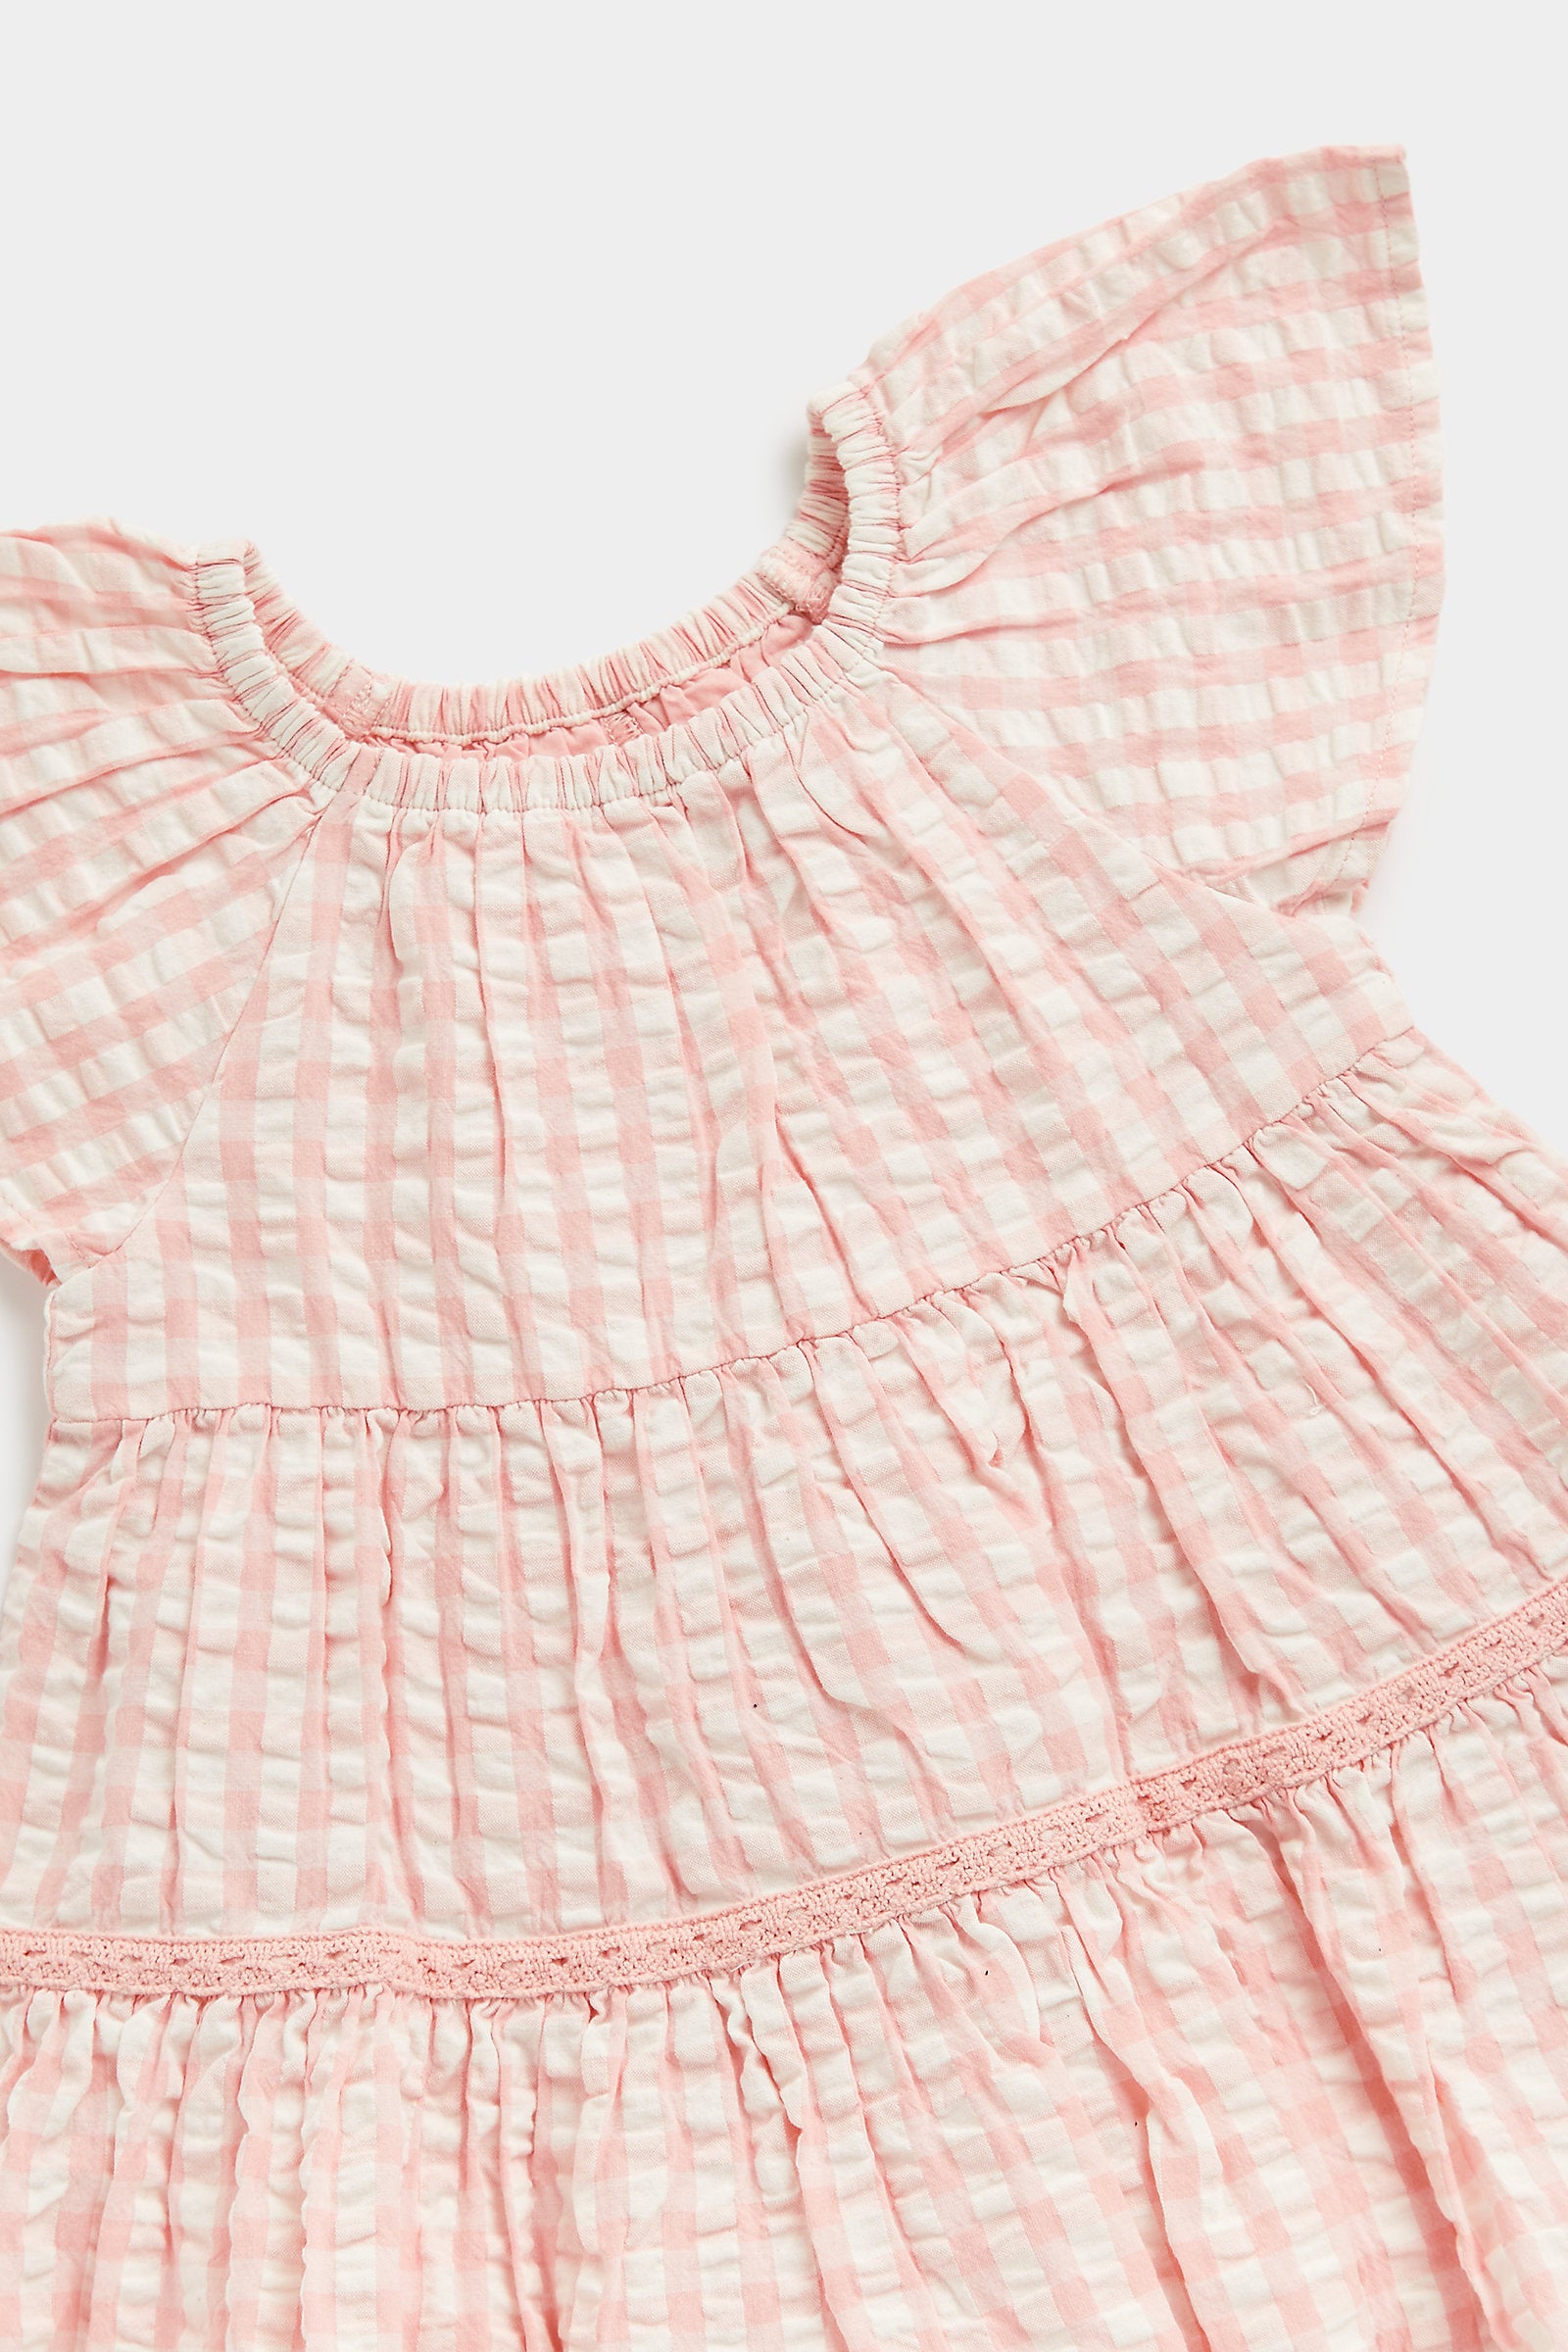 Mothercare Pink Gingham Tiered Dress